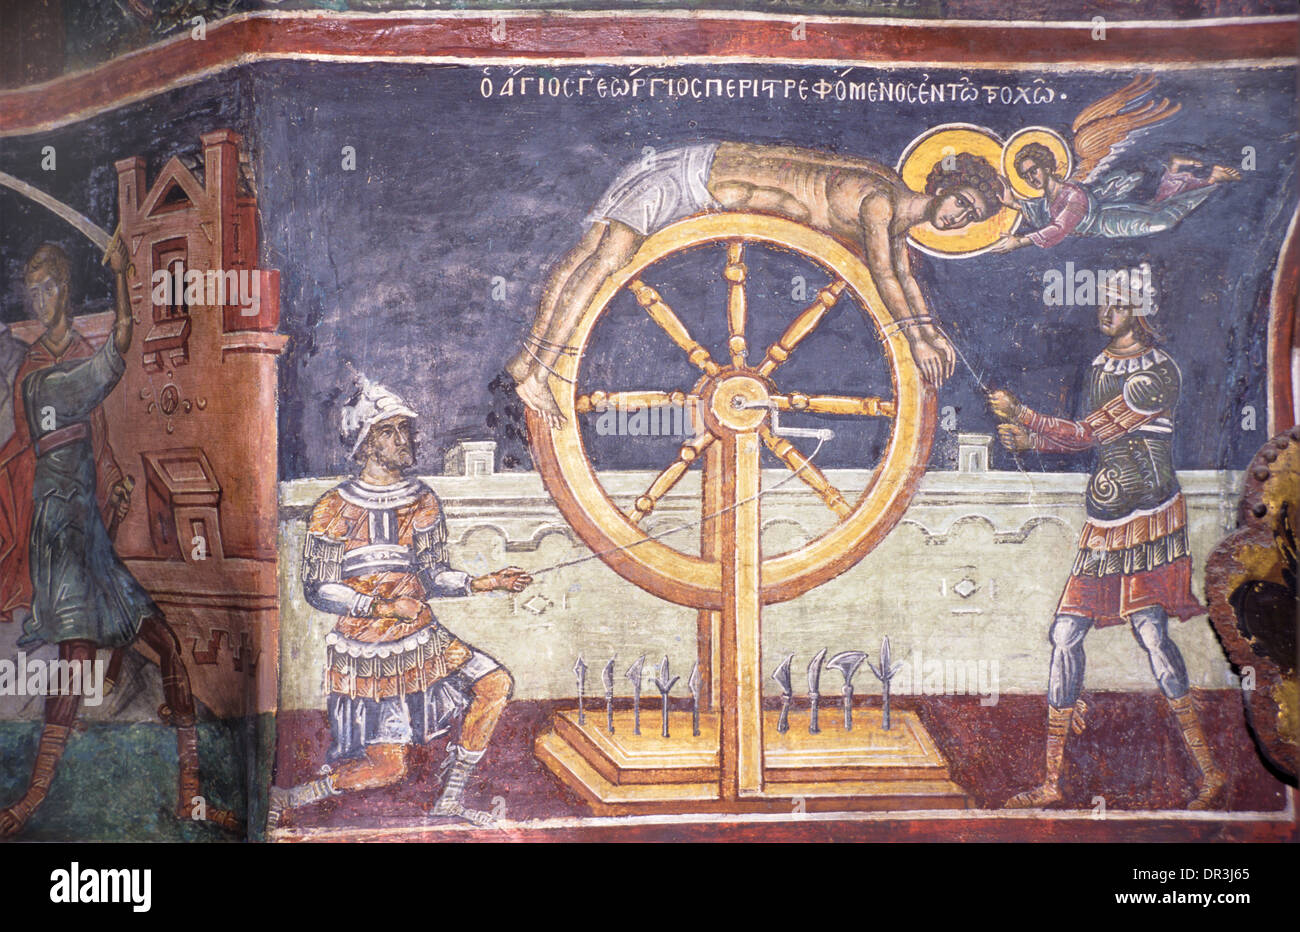 Breaking Wheel, Execution Wheel or Catherine Wheel. Torture or Punishment of Christian Martyr by Roman Soldiers. Fresco or Wall Painting in the Narthex of Dionysiou Monastery Mount Athos Greece Stock Photo